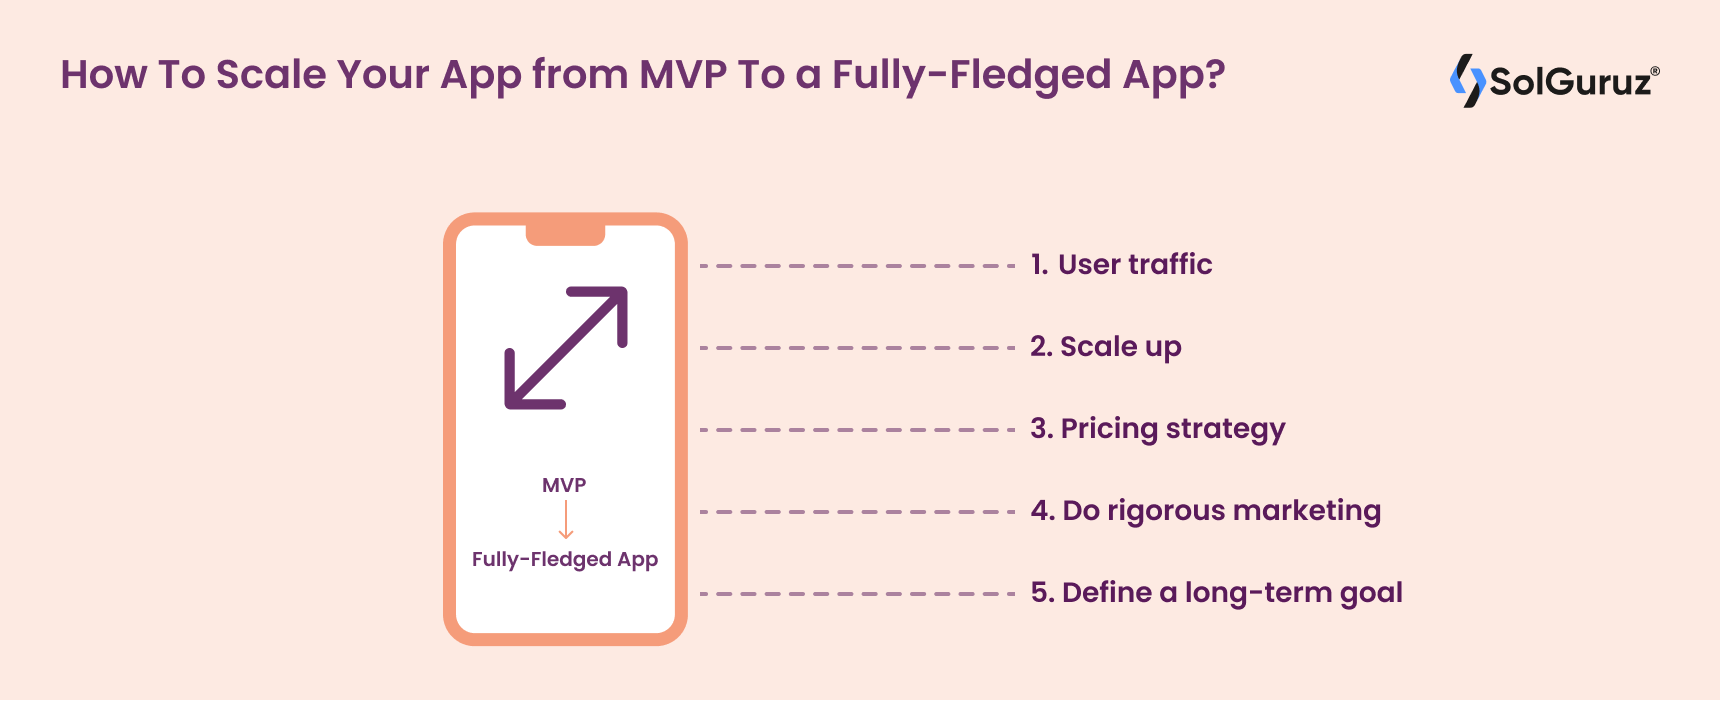 How To Scale Your App from MVP To a Fully-Fledged App